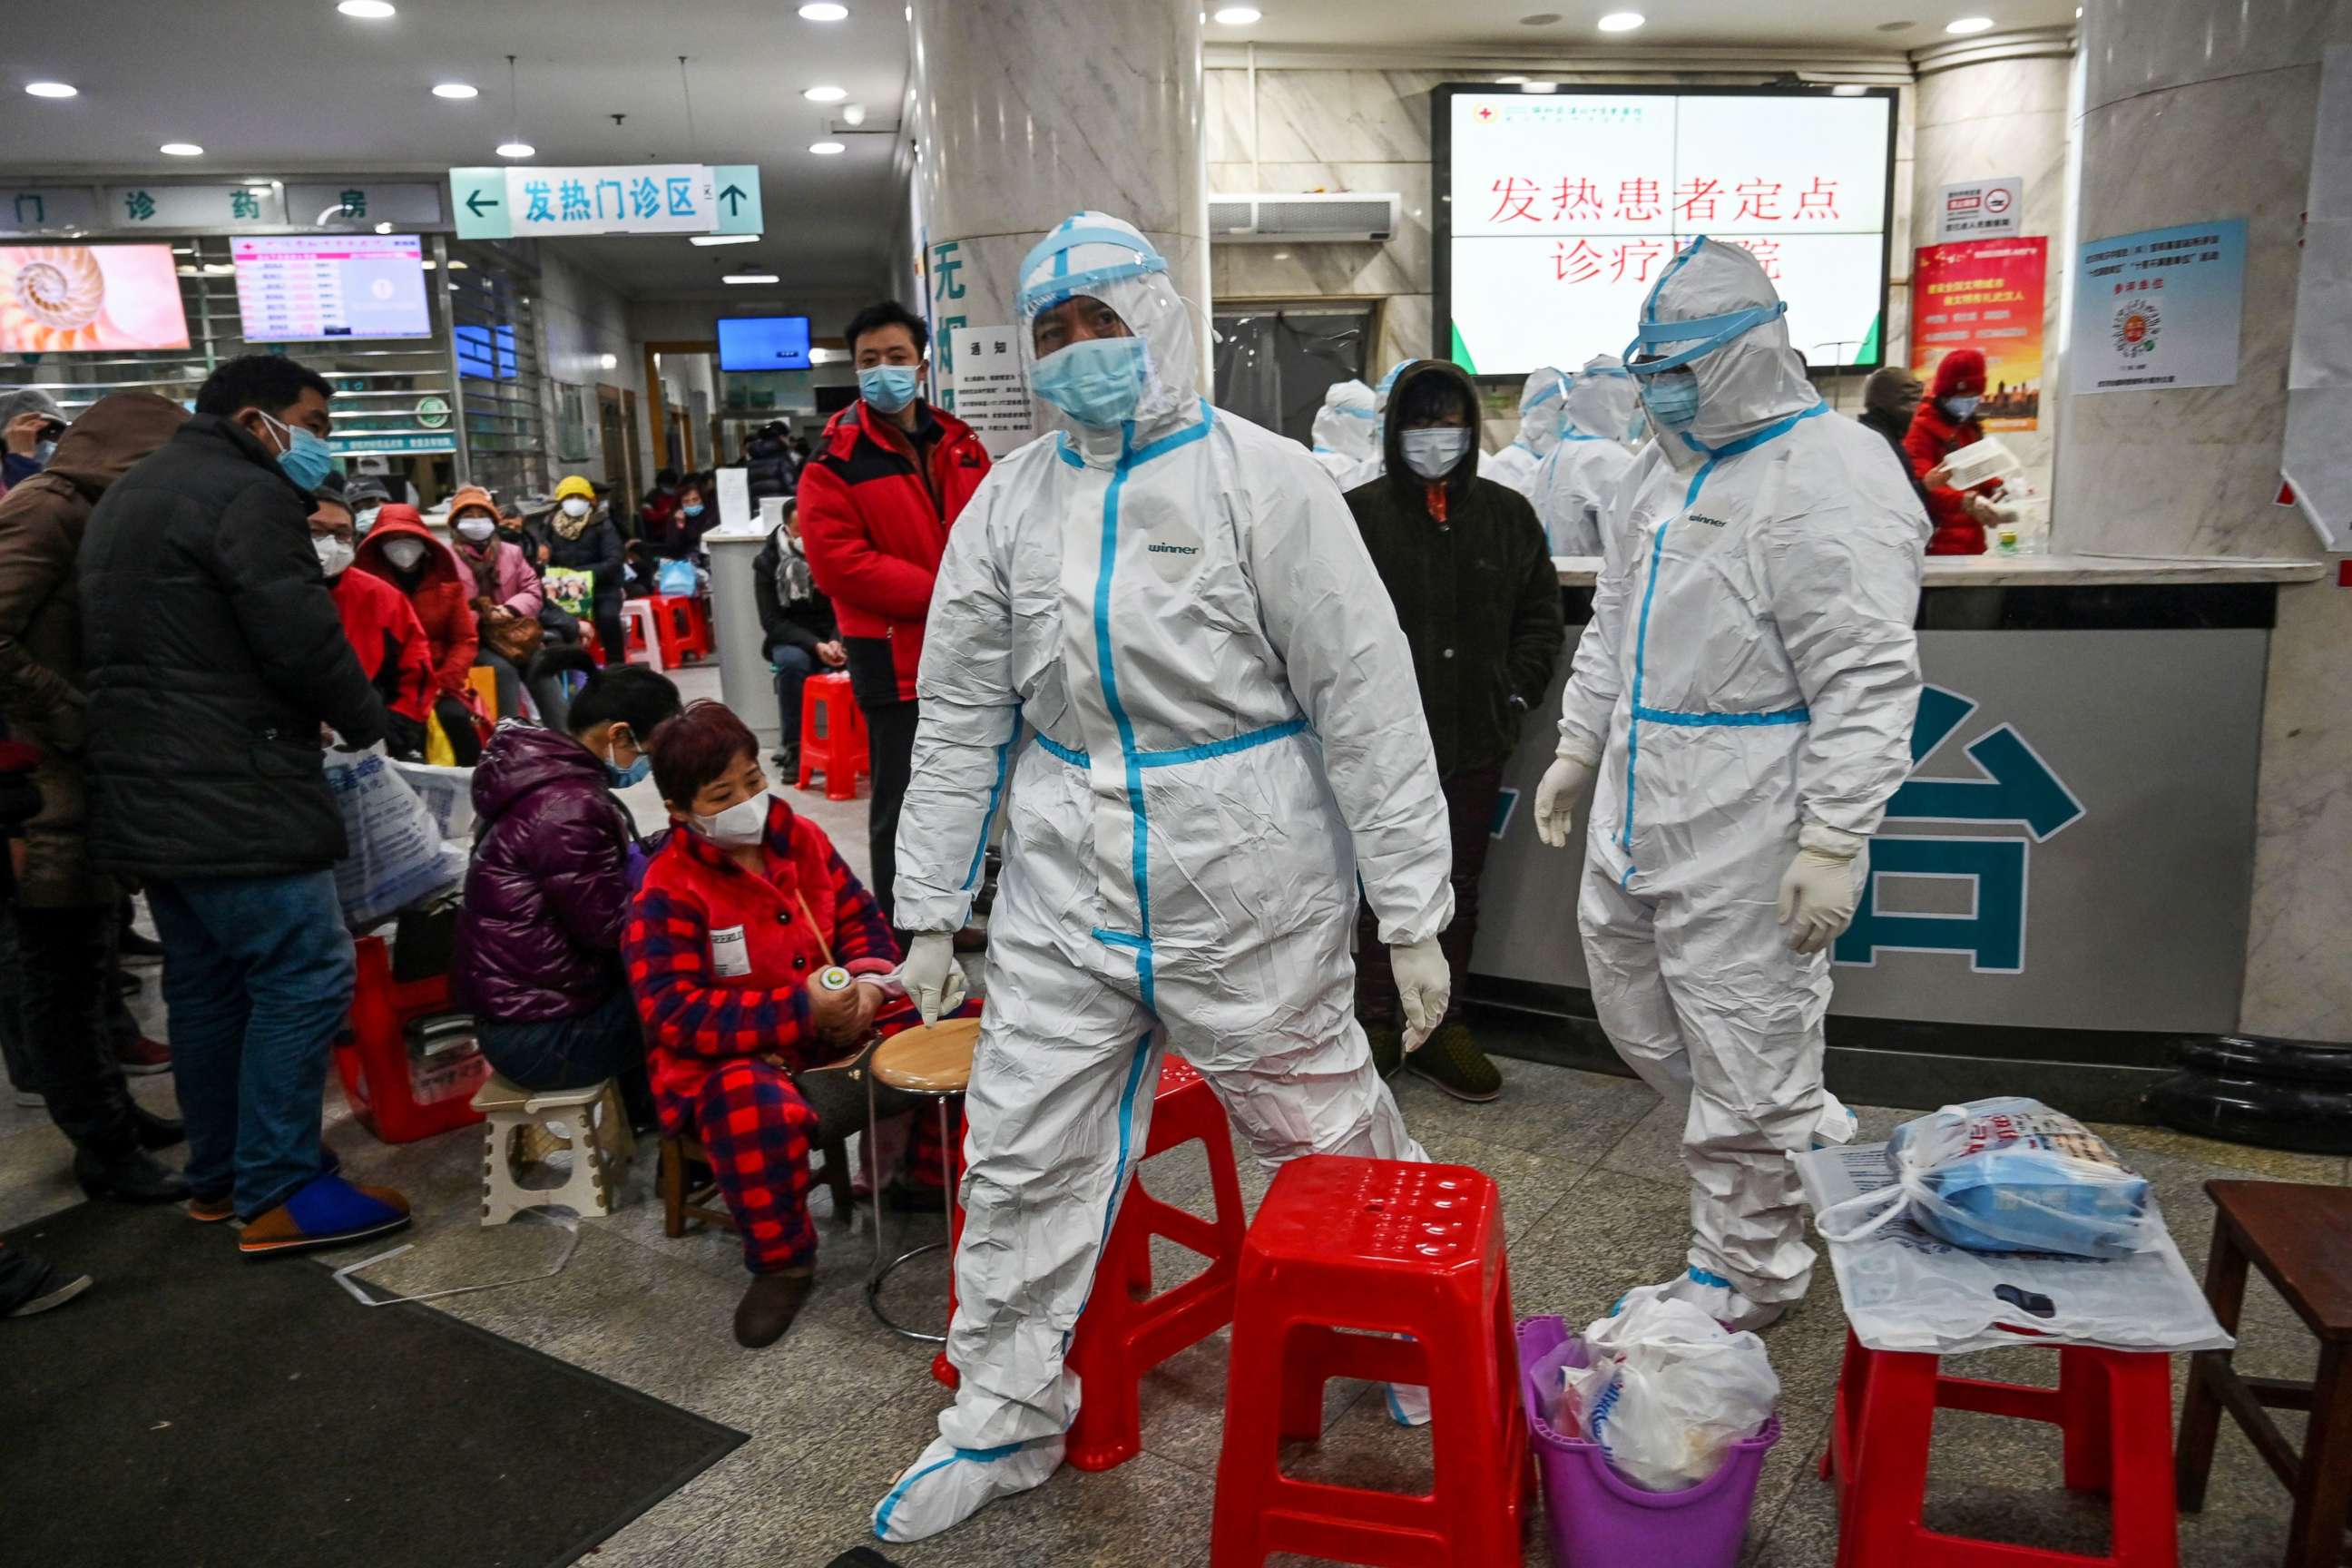 PHOTO: Medical staff members wearing protective clothing walk next to patients waiting for medical attention at the Wuhan Red Cross Hospital in Wuhan, China, Jan. 25, 2020.